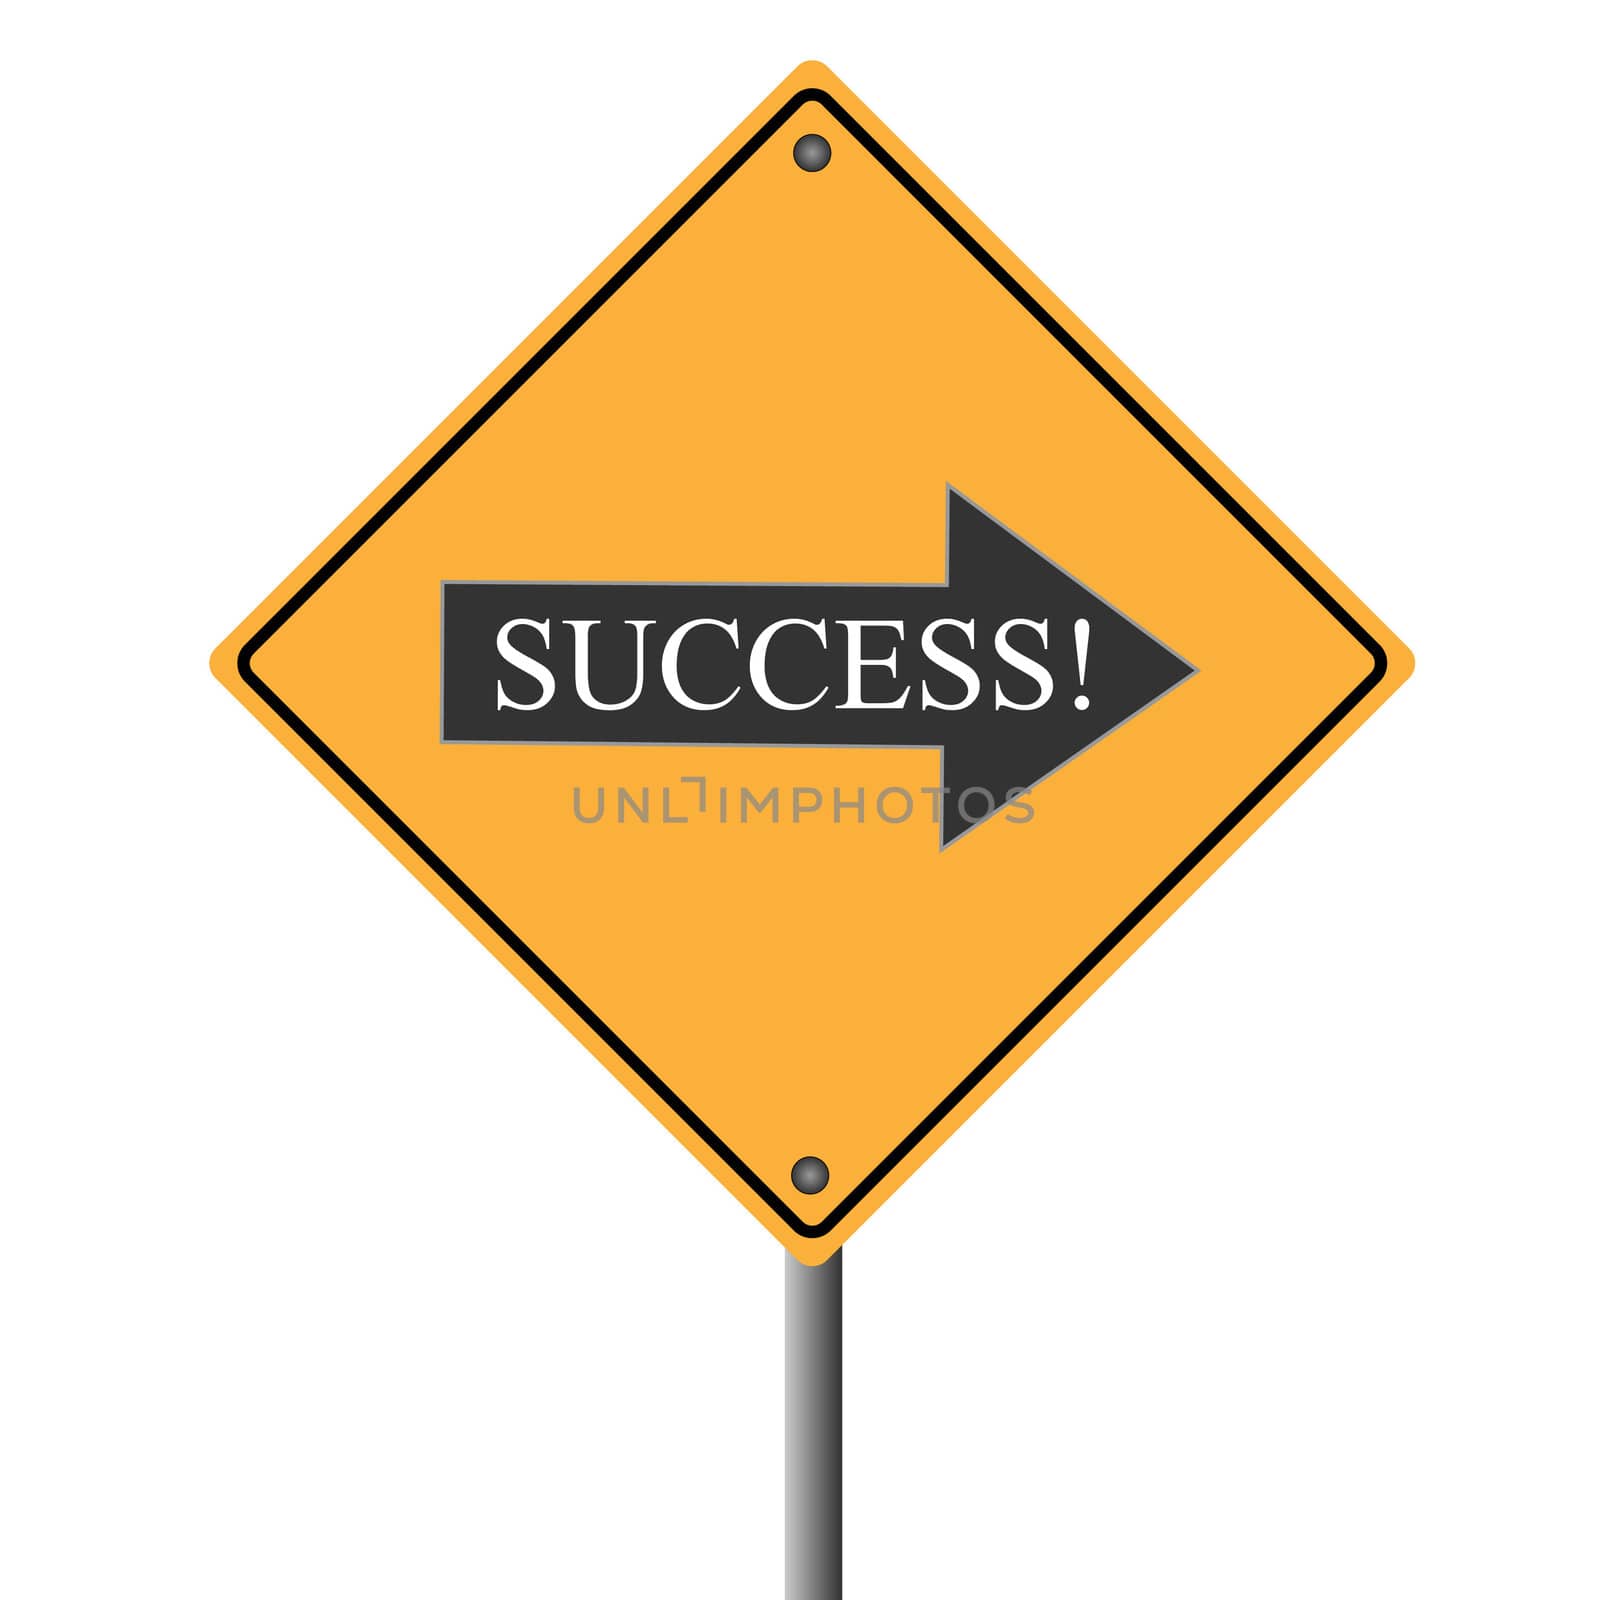 Image of a yellow road sign pointing to "success".